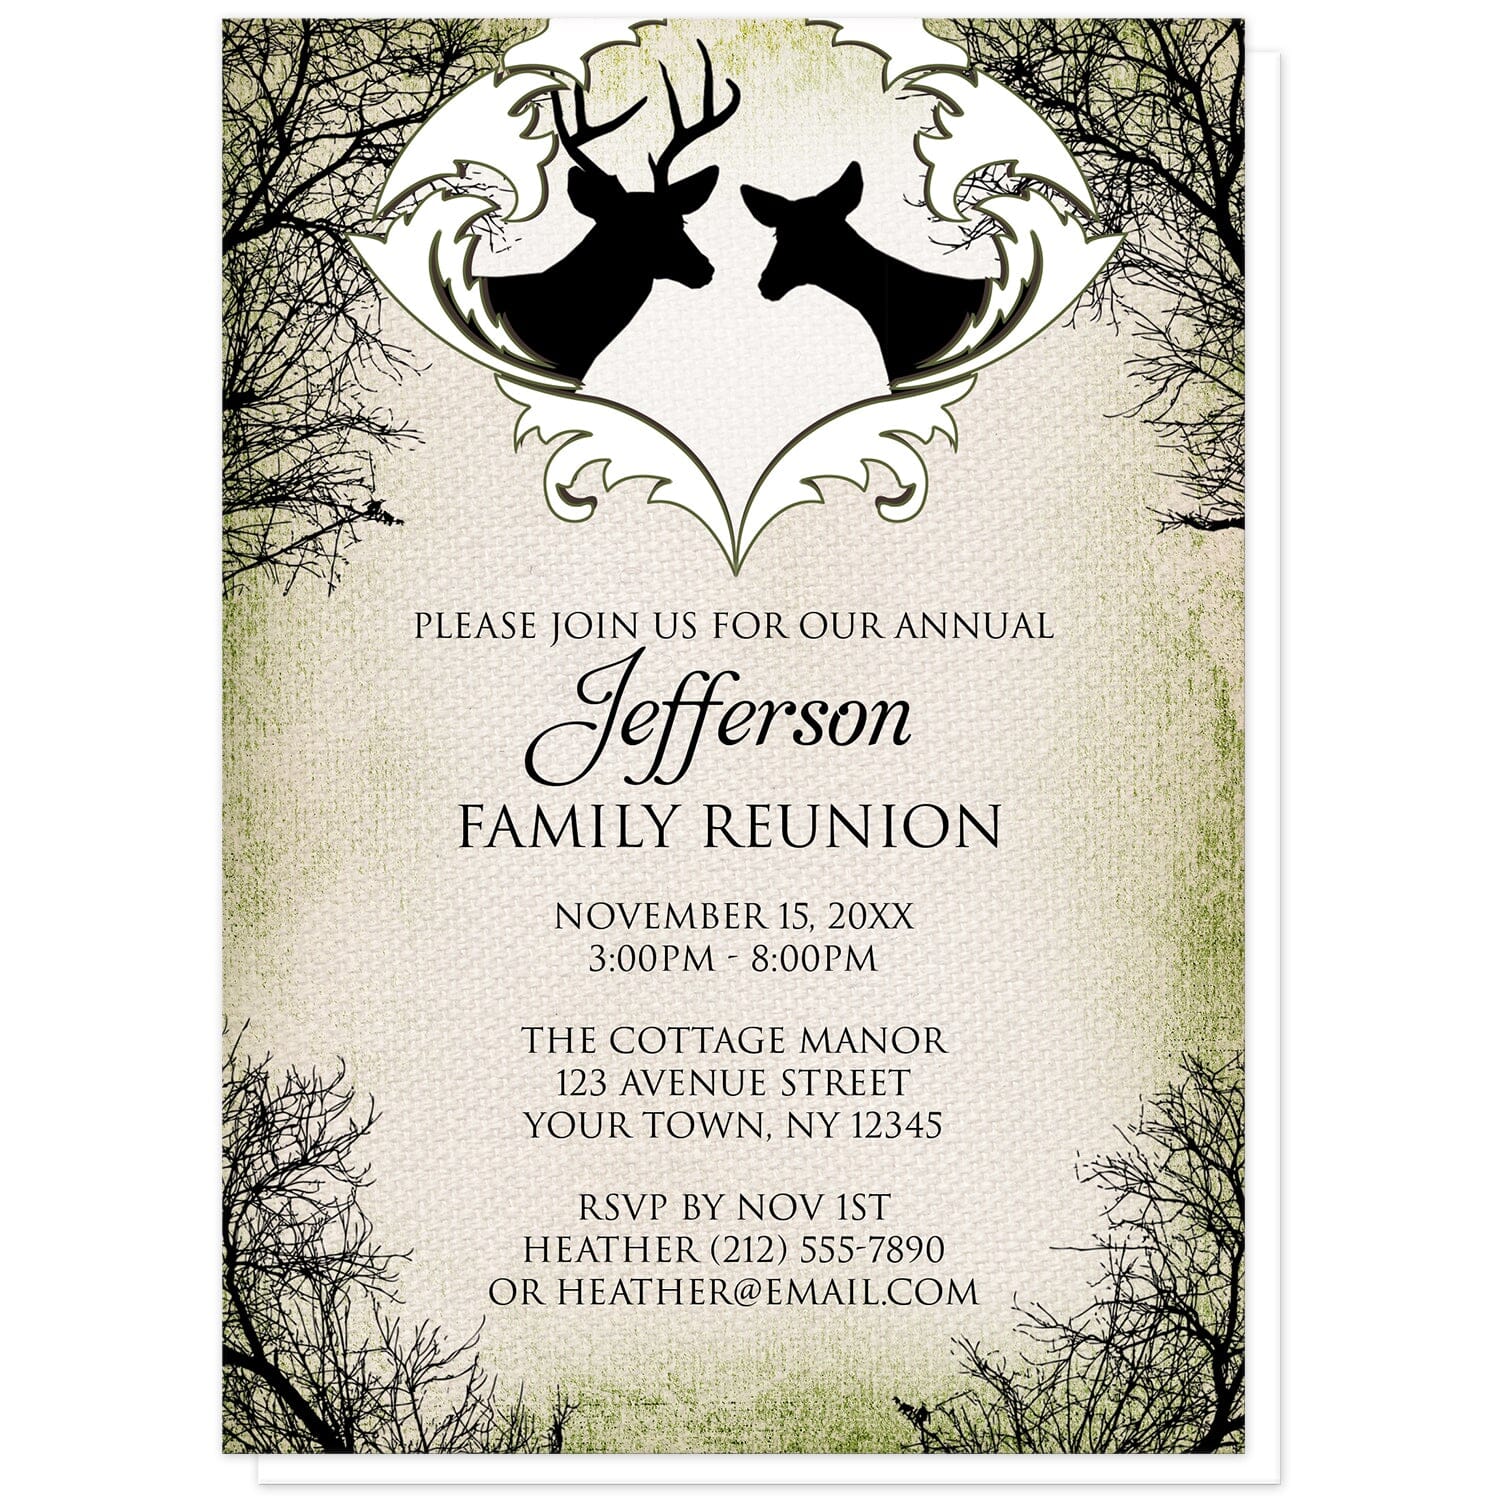 Rustic Deer Frame Canvas Family Reunion Invitations at Artistically Invited. Rustic deer frame canvas family reunion invitations designed with black silhouettes of a buck with antlers and a doe in a white frame design at the top, over a rustic brown and green canvas design bordered with winter tree silhouettes. Your personalized reunion celebration details are custom printed in black below the deer over the canvas background design.